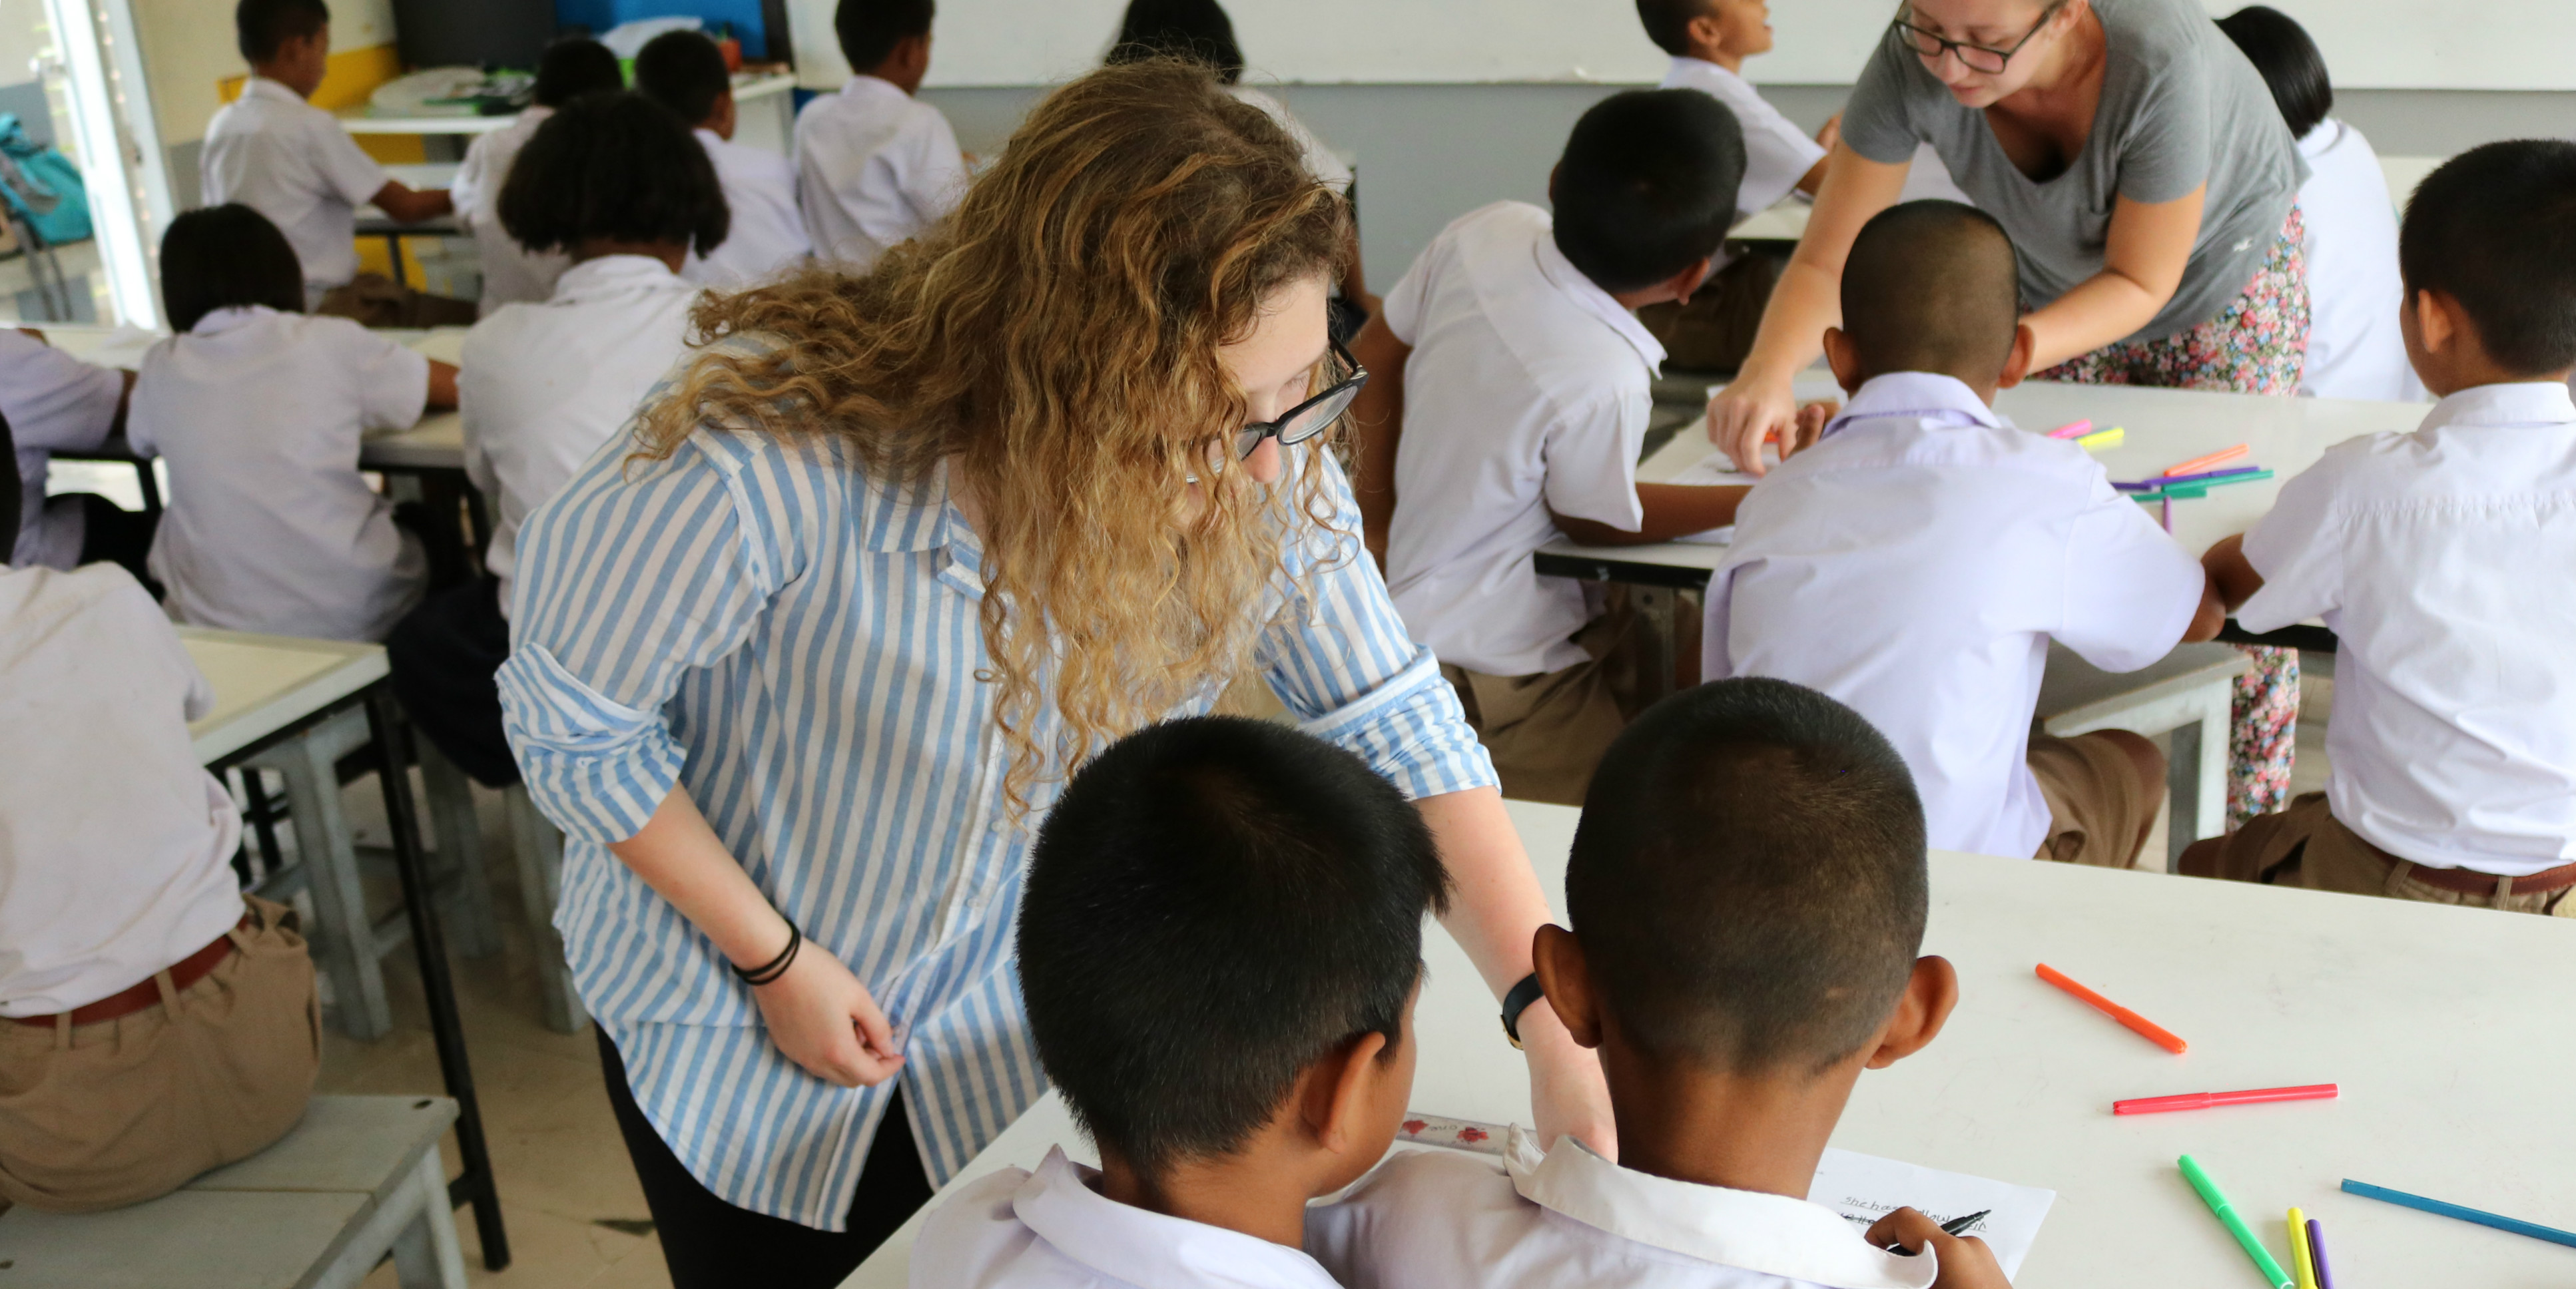 After completing their TEFL training with GVI, a participant assists learners in a school in Thailand.